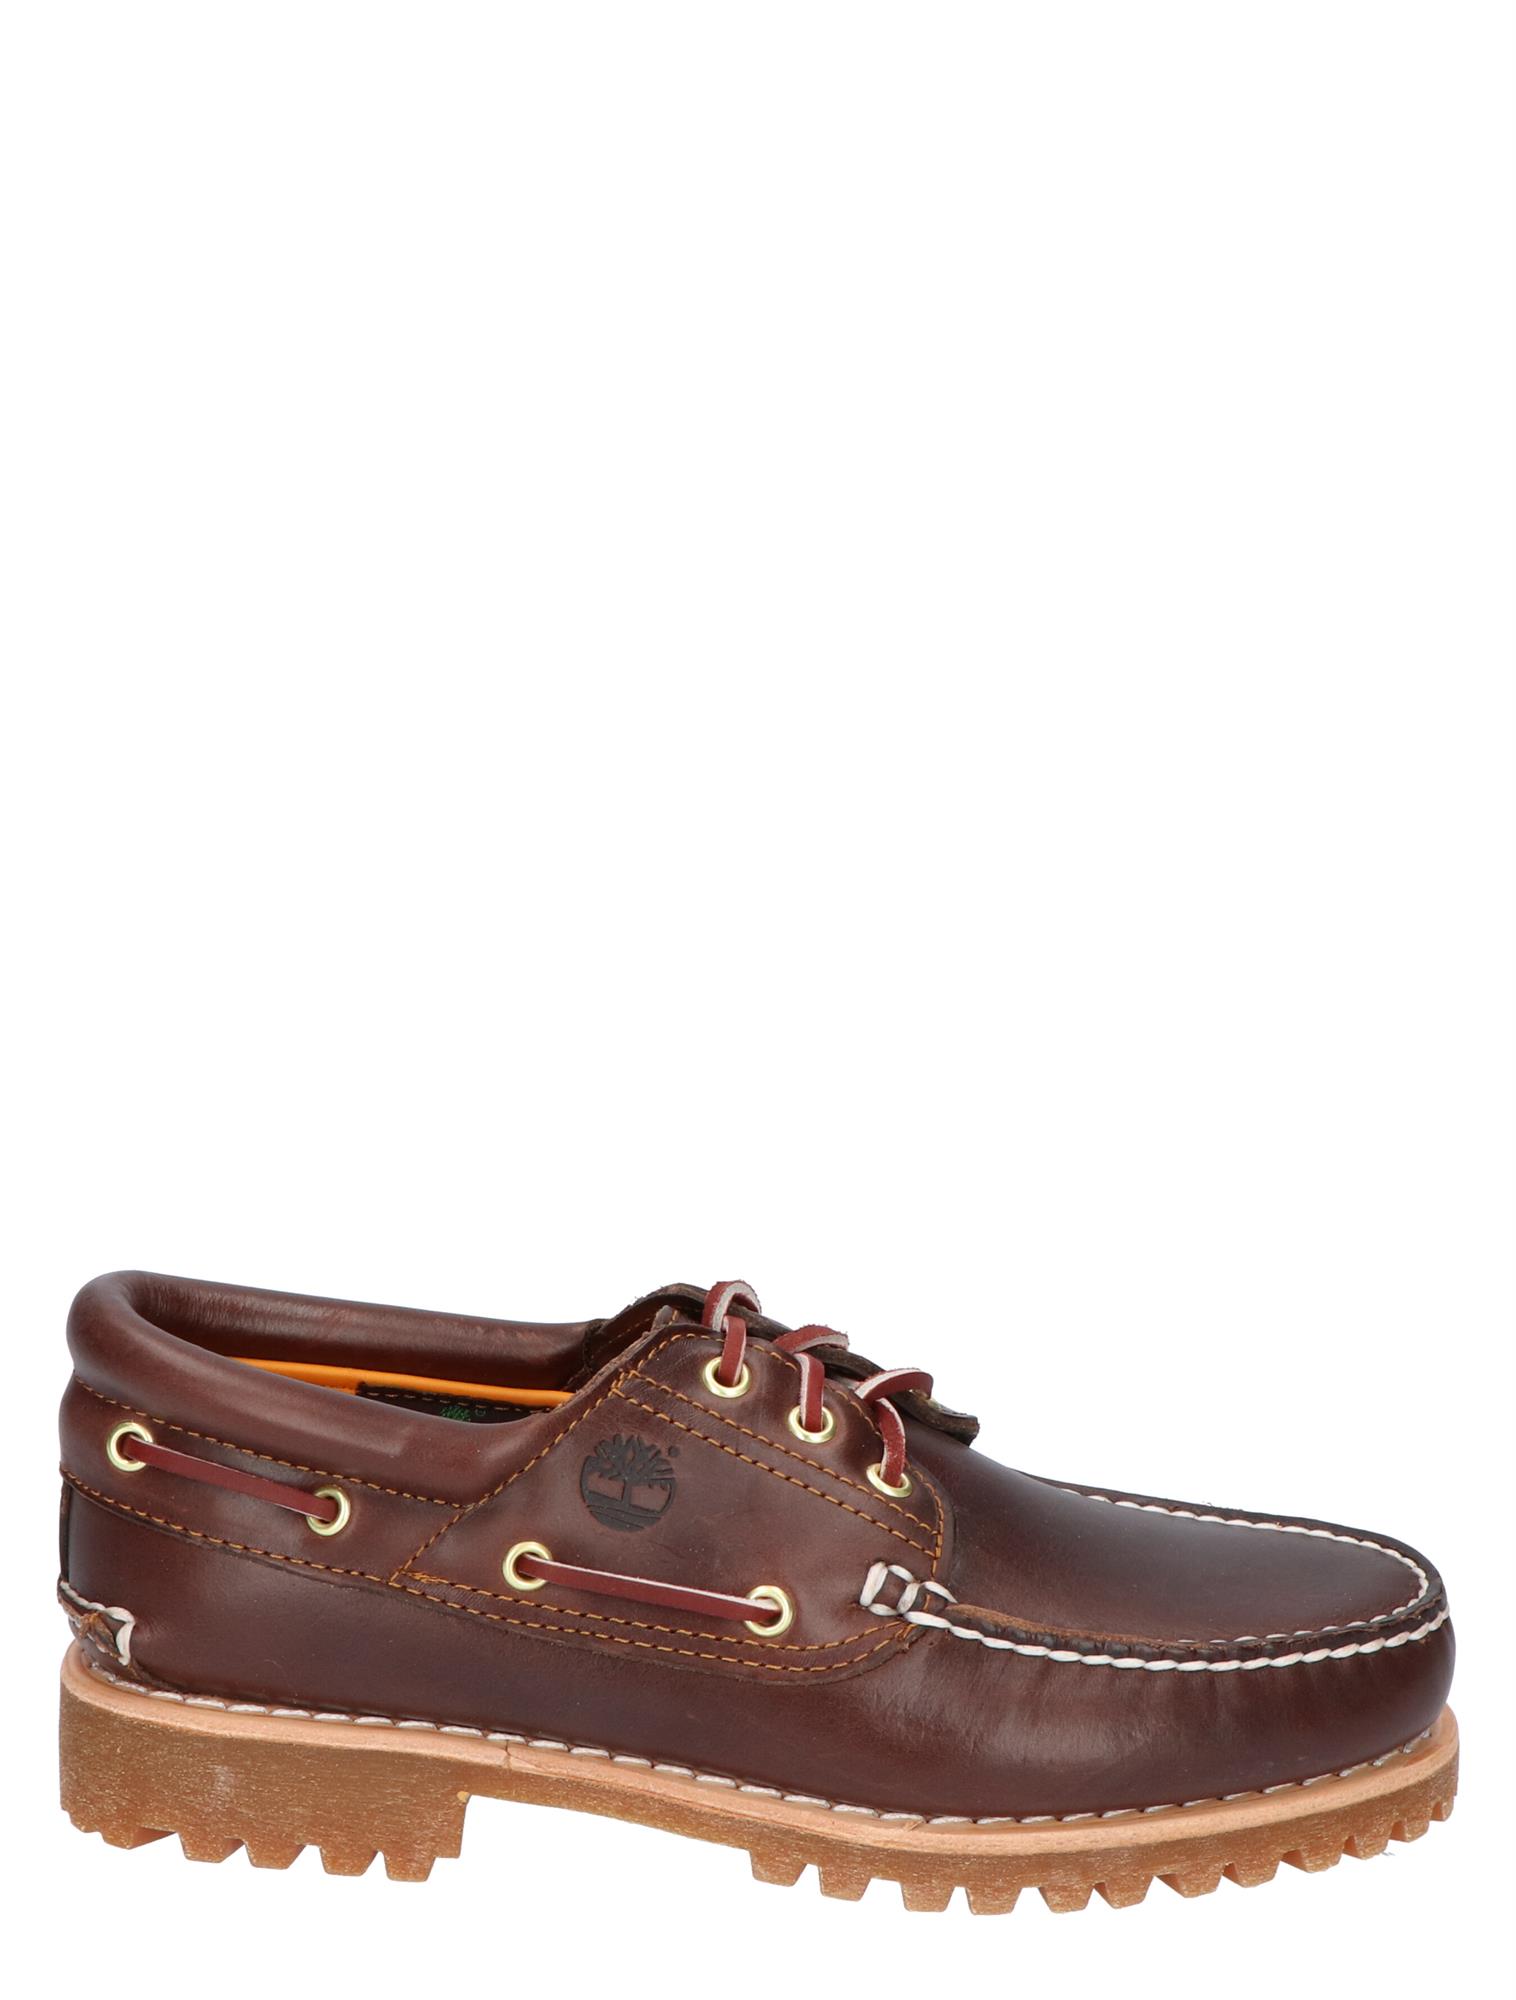 Timberland Classic Brown of Lace Up Shoes